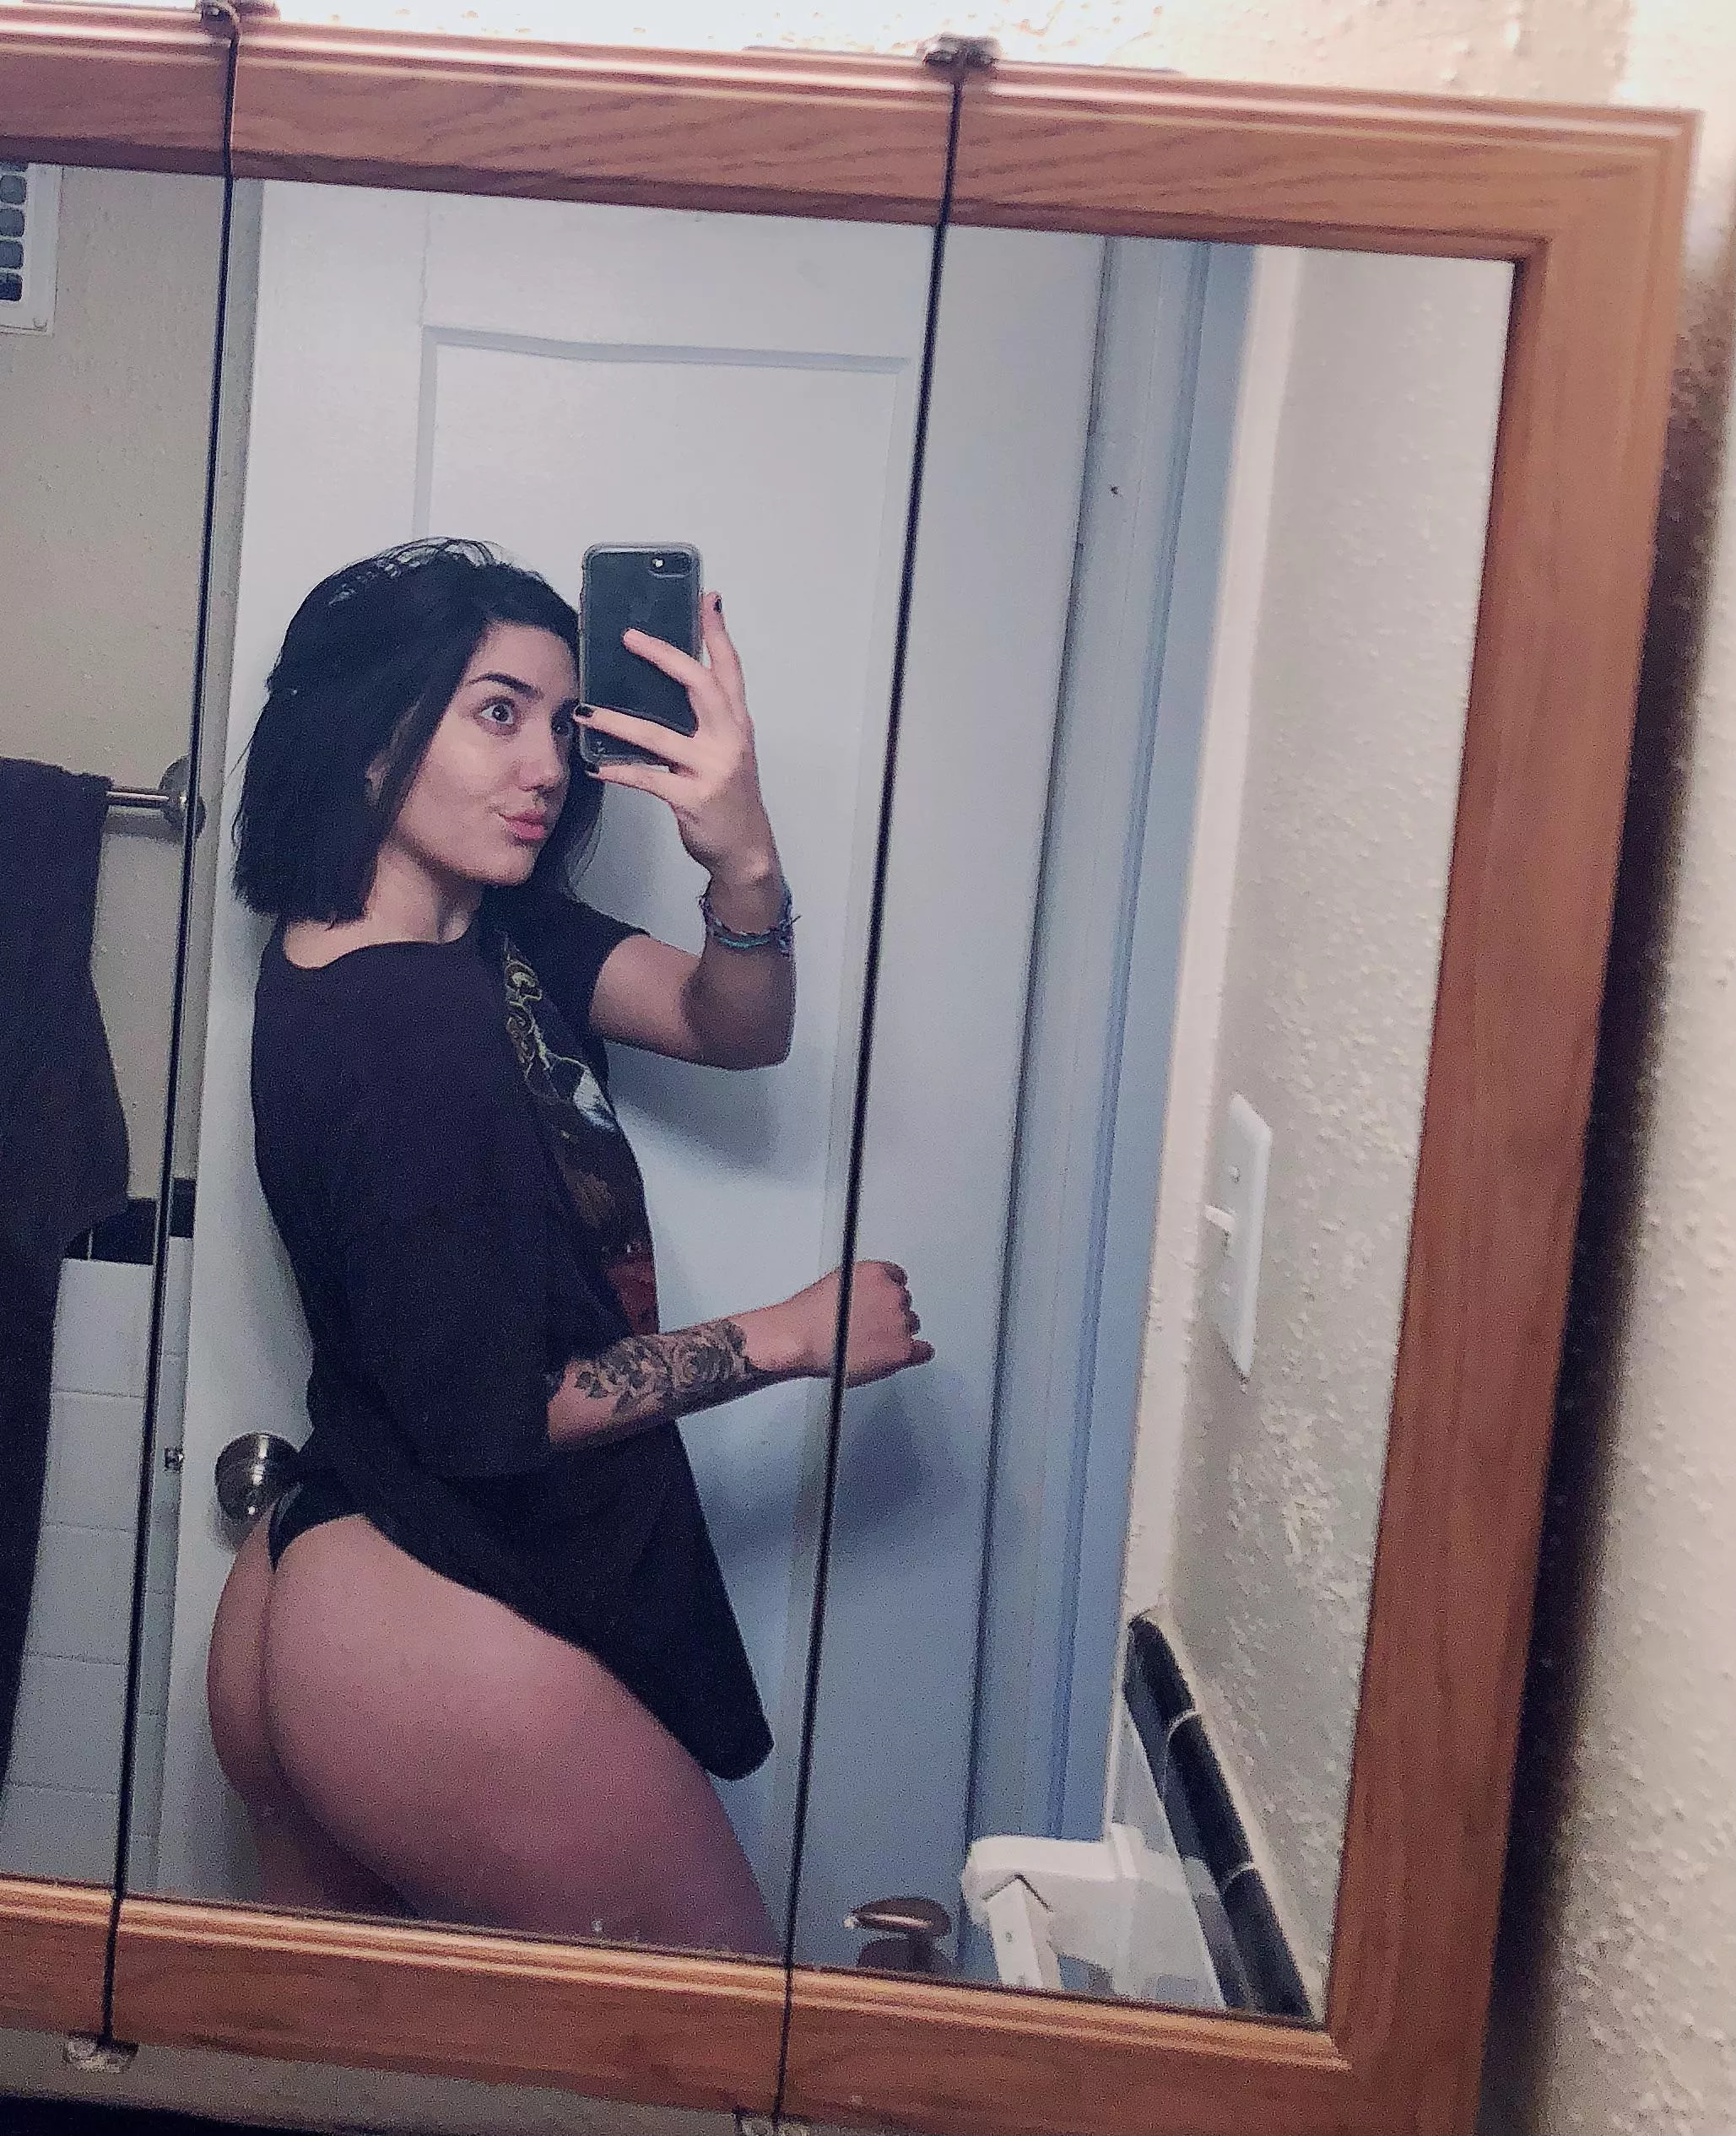 Latina Cell Phone Nudes - Your big booty latina F23 nudes : BubbleButts | NUDE-PICS.ORG